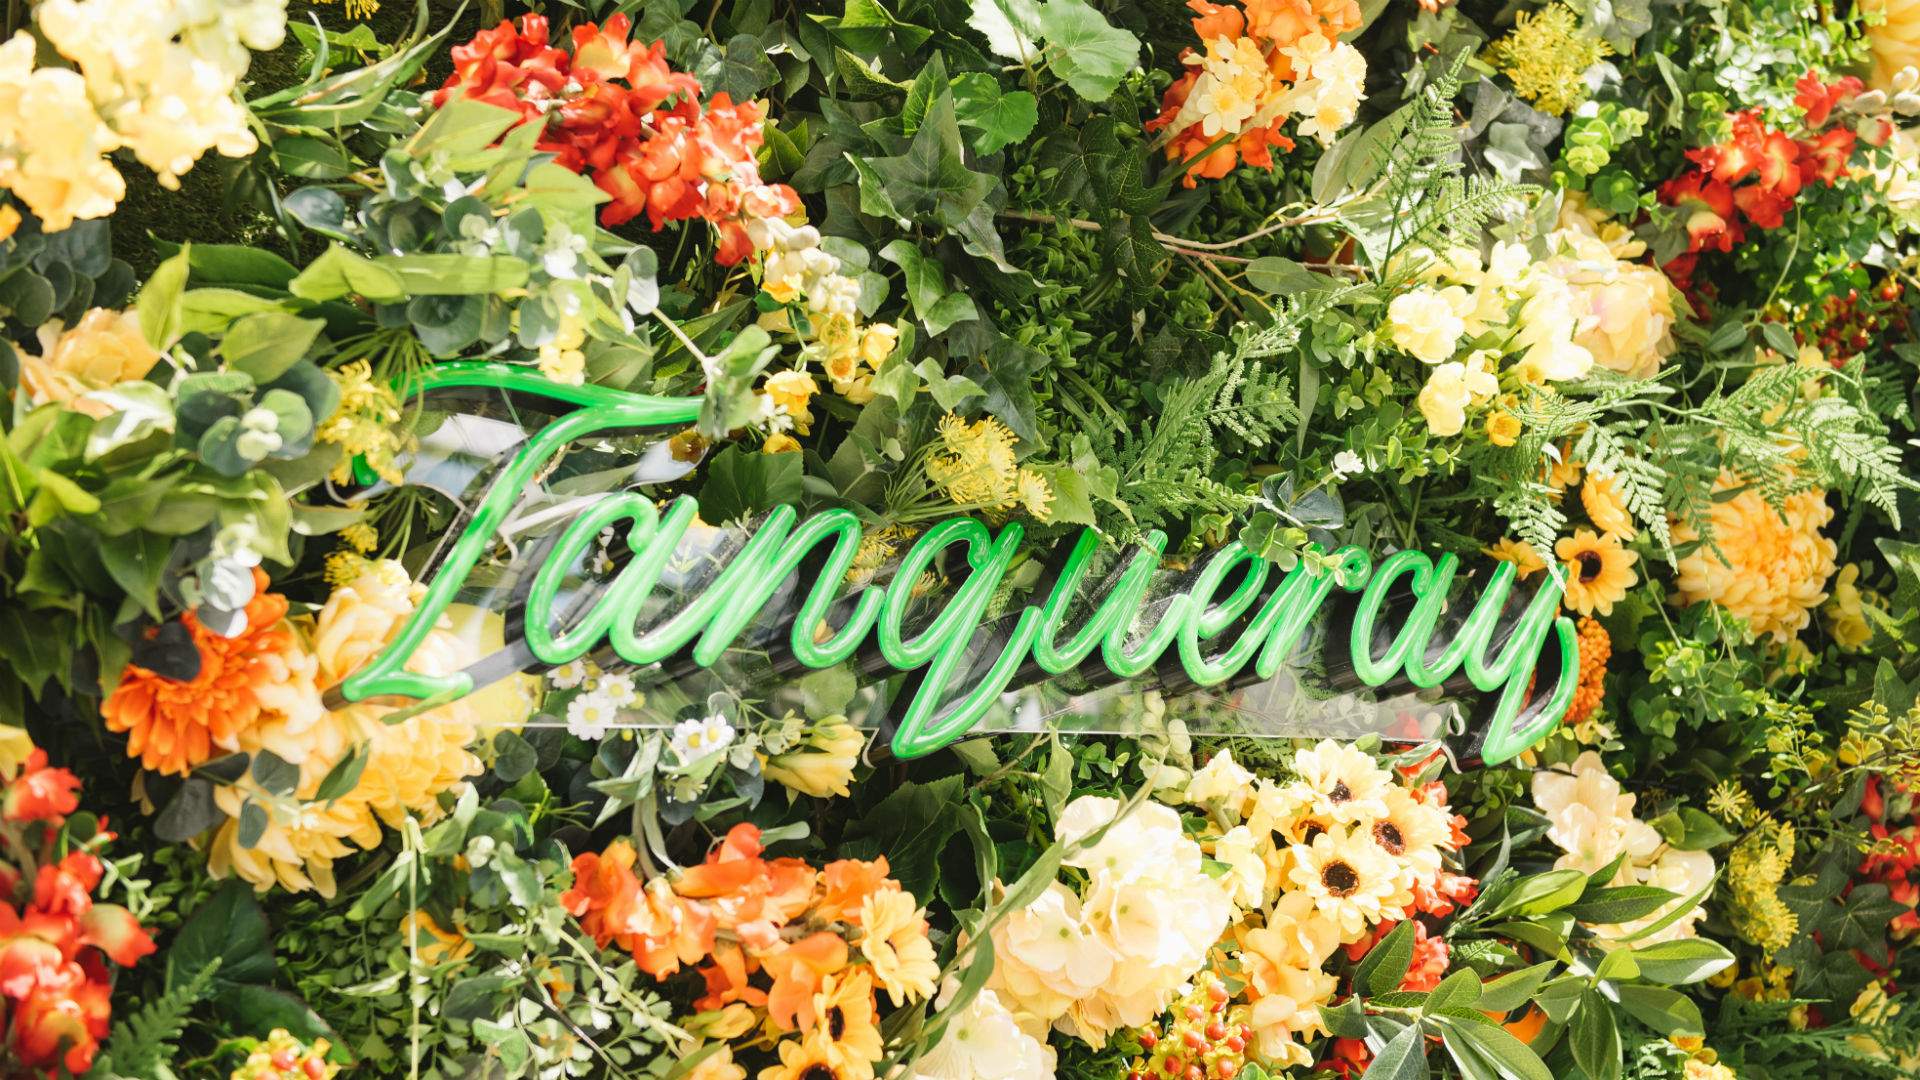 Tanqueray Pop-Up Bar at Taste of Sydney Collective